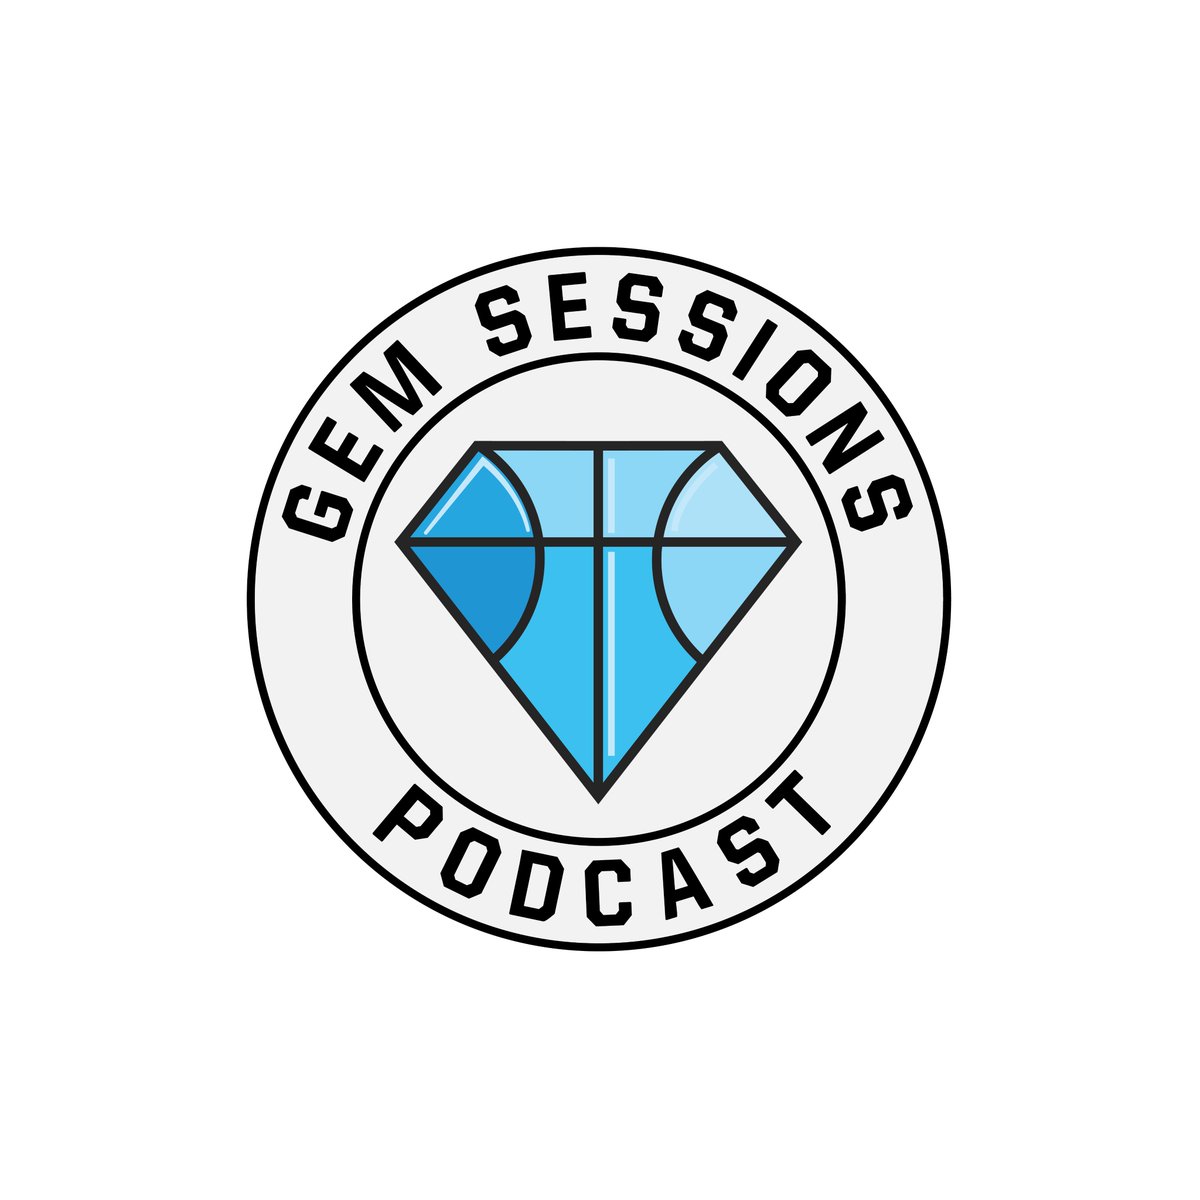 A project 3+ years in the making. Learning, investing, developing. Excited to announce the launch of my podcast Gem Sessions (@GemSessionsPod) beginning November 1. Connecting basketball athletes, coaches & trainers chasing optimal performance on & off the court. Let's goooo!